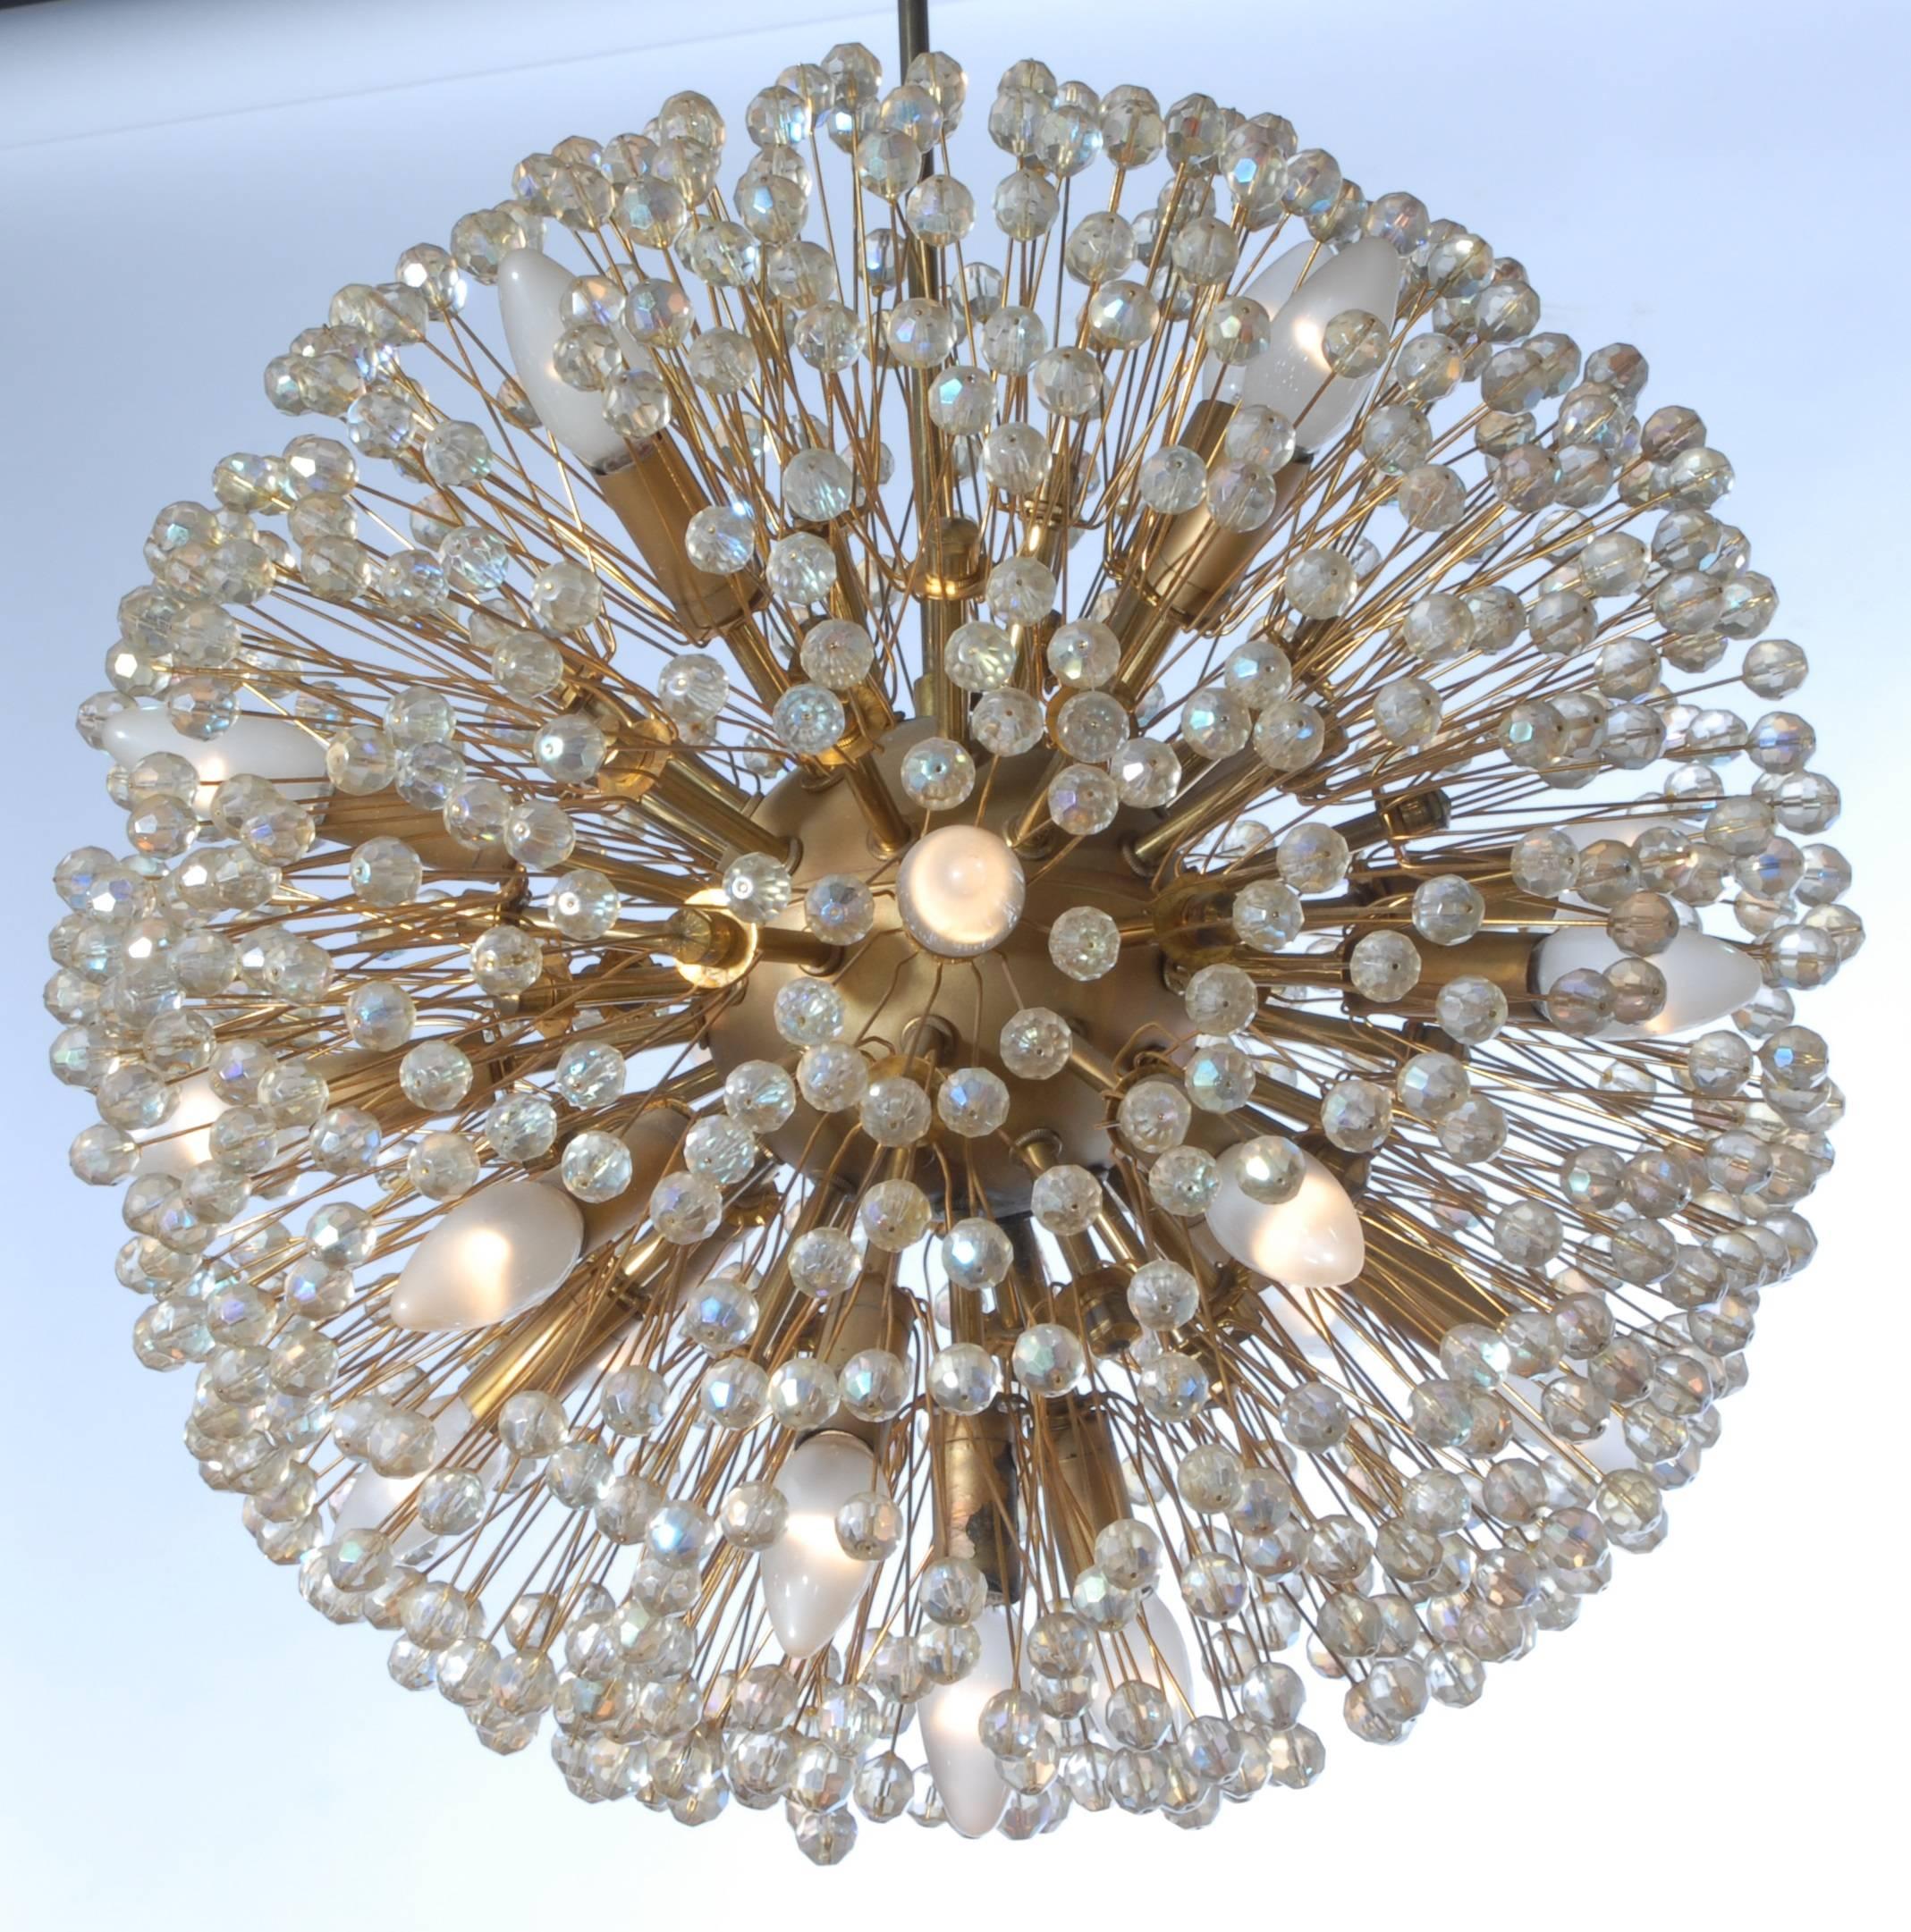 Extraordinary large chandeliers designed by Emil Stejnar and made in Vienna in 1960 by the famous Rupert Nikoll. Chandelier is made by an Austrian crystals. We offer set of six pieces, every piece is in excellent condition without any damages.